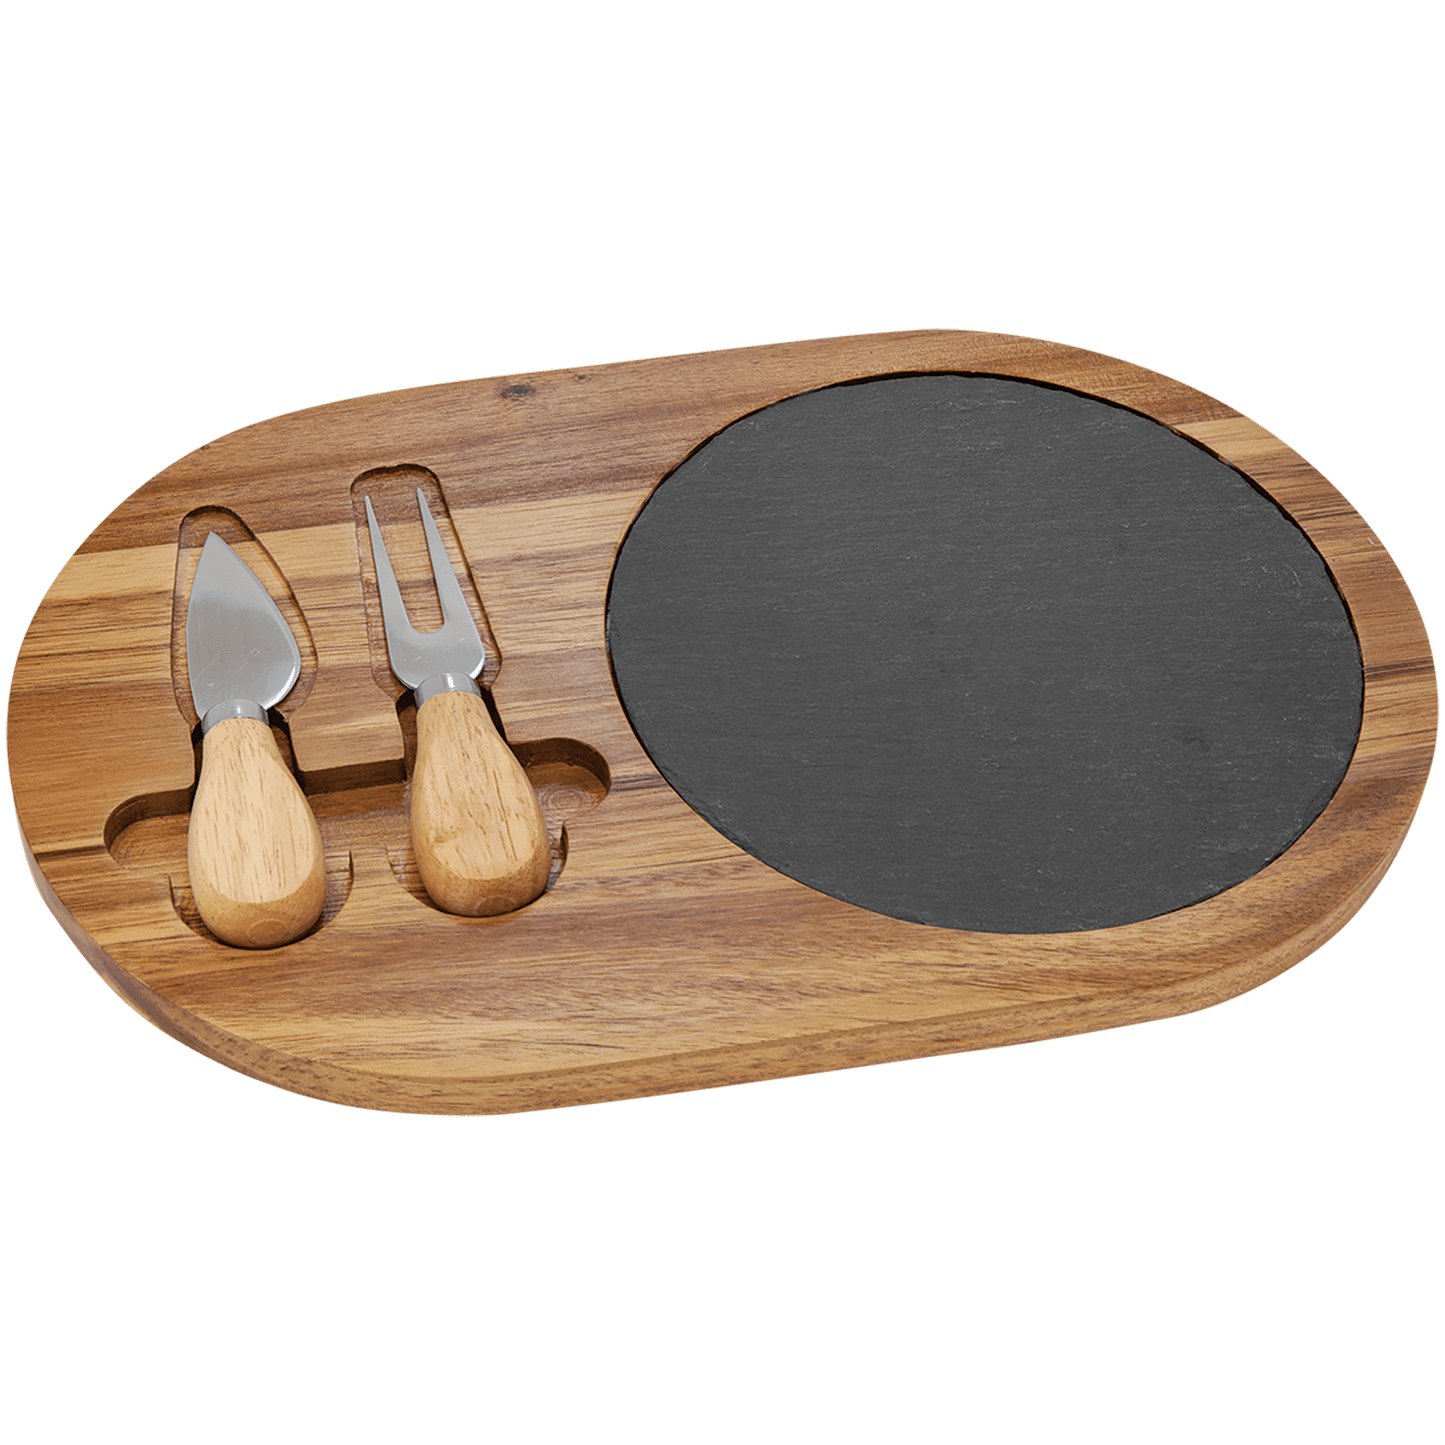 Personalized 12 1/2" x 7 3/4" Acacia Wood/Slate Oval Cheese Set with Two Tools